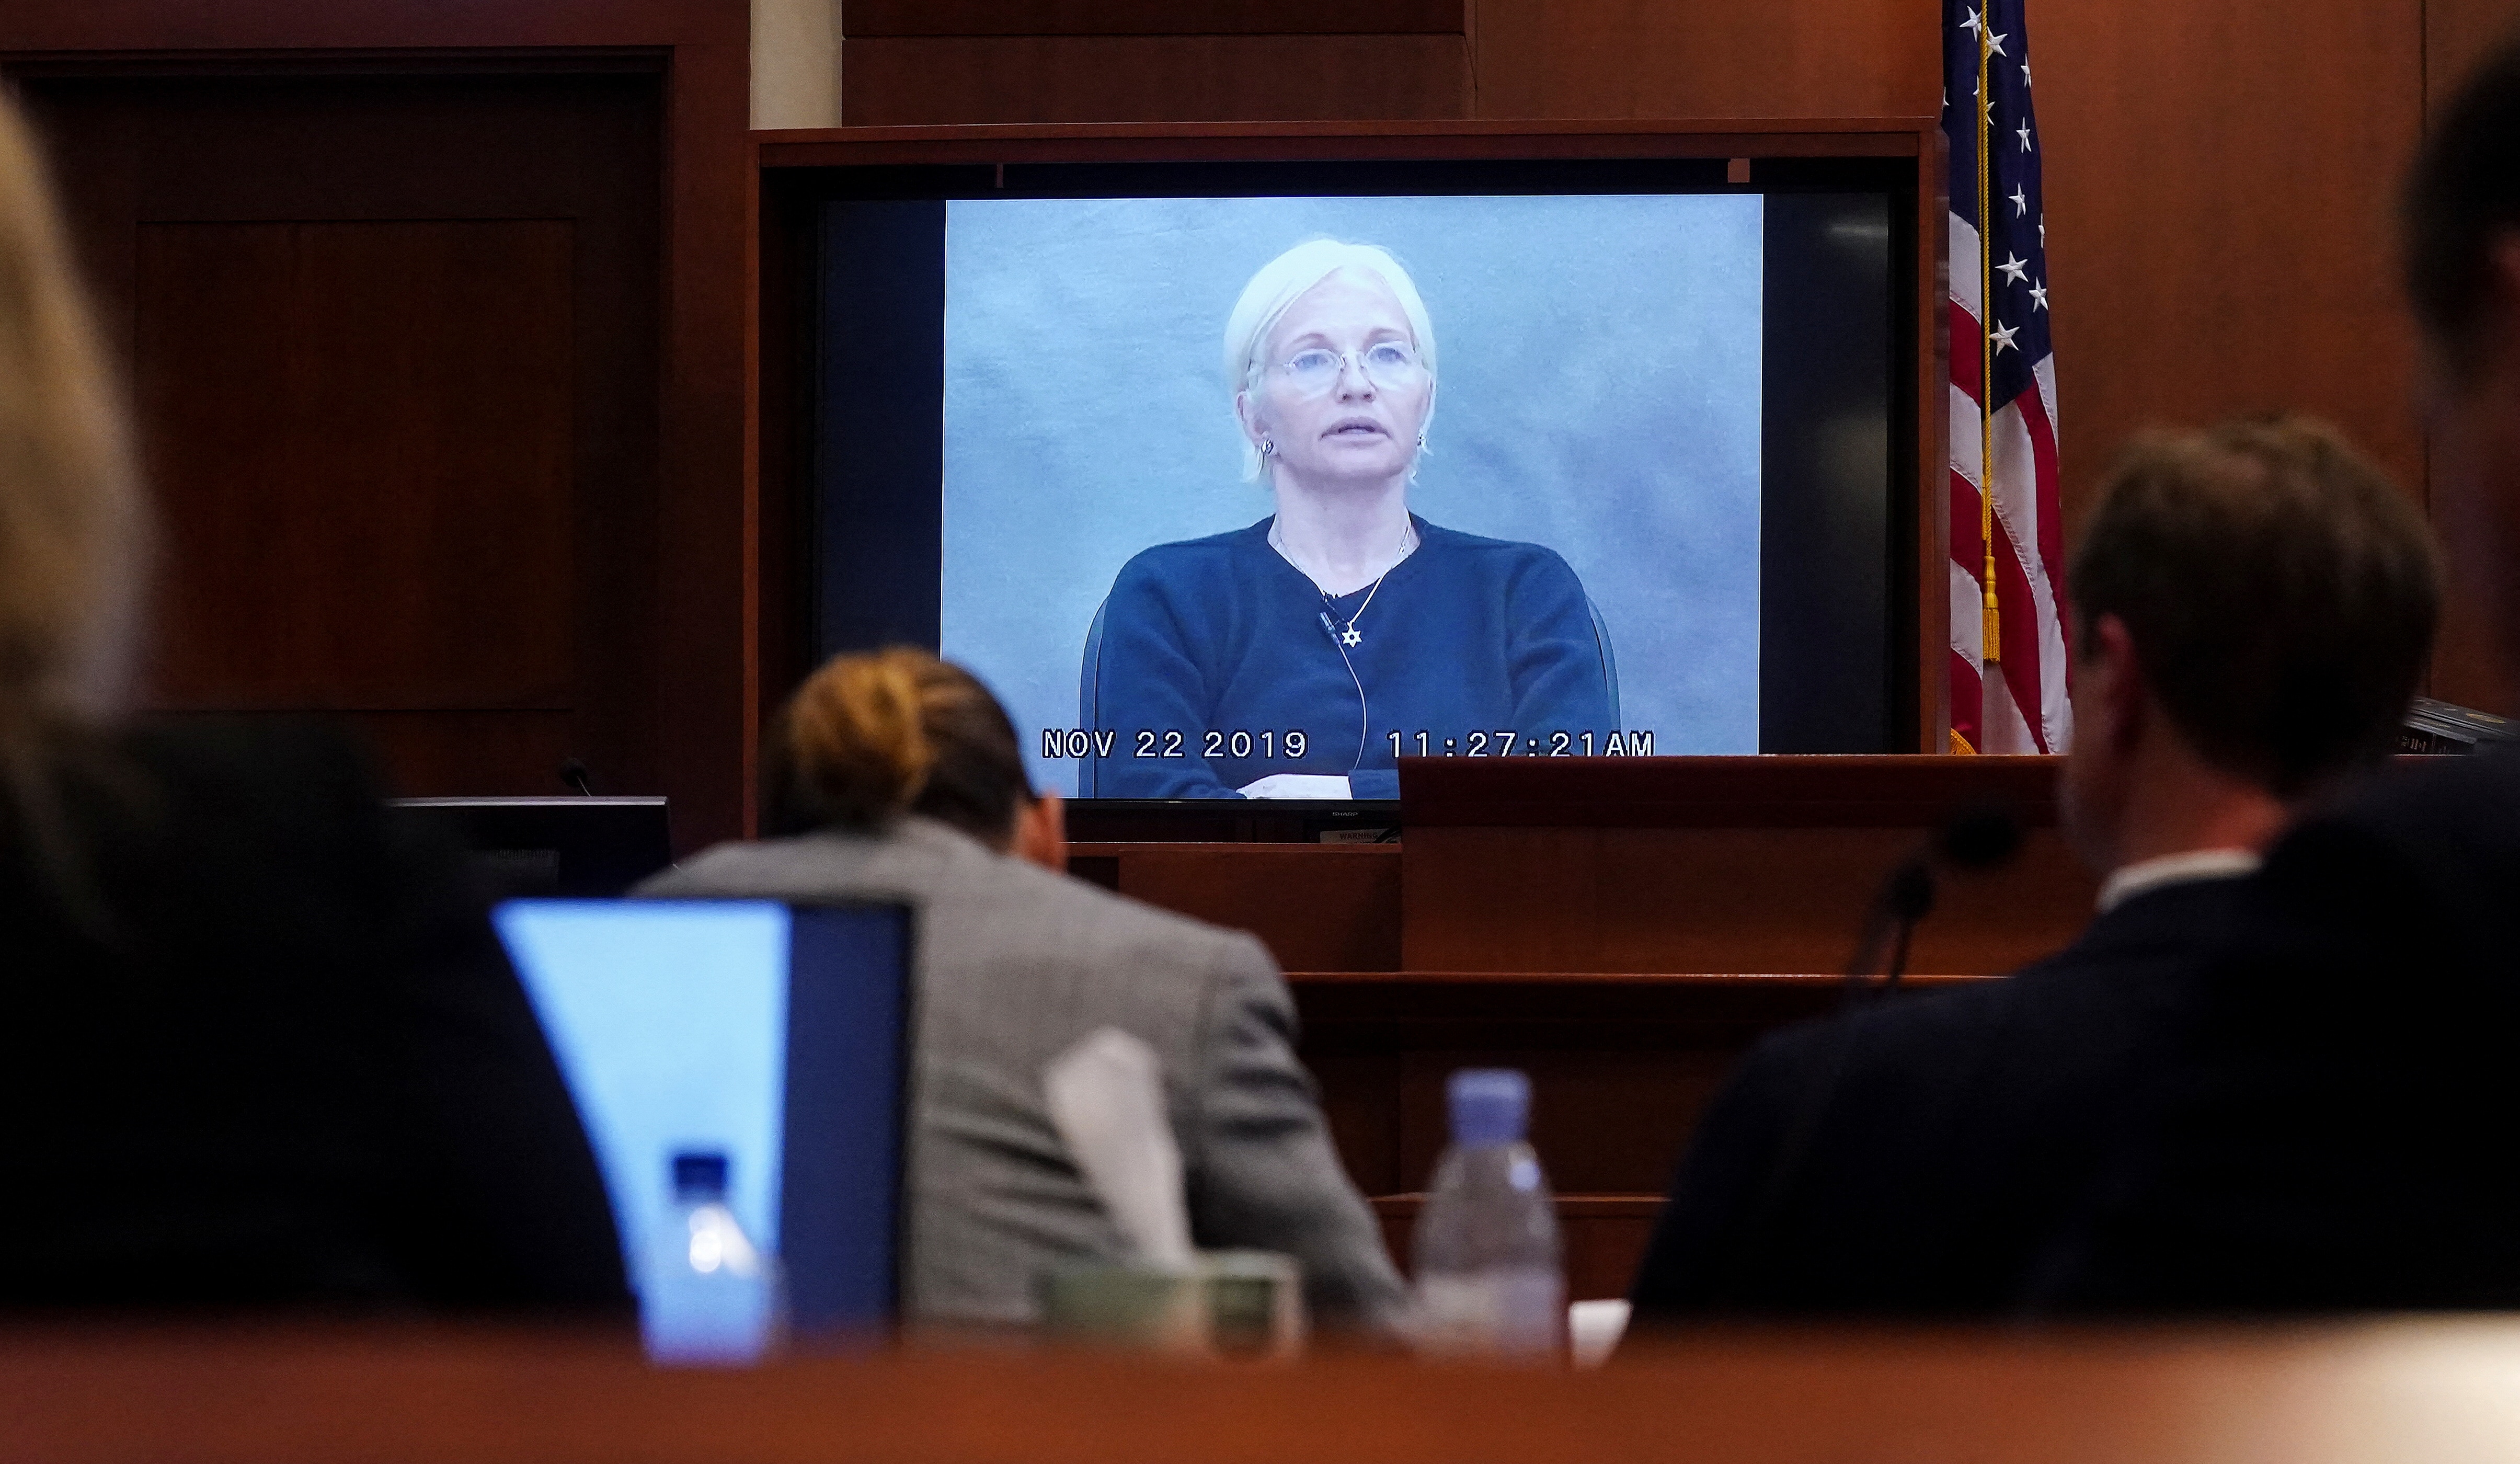 Actor Ellen Barkin appeared on the Monitor in 2019 on a defamation lawsuit against Johnny Depp's former wife, actor Amber Heard, at Fairfax County Circuit Court in Fairfax, Virginia, on May 19, 2022.  Pool by Shawn Thuy / REUTERS (REUTERS)